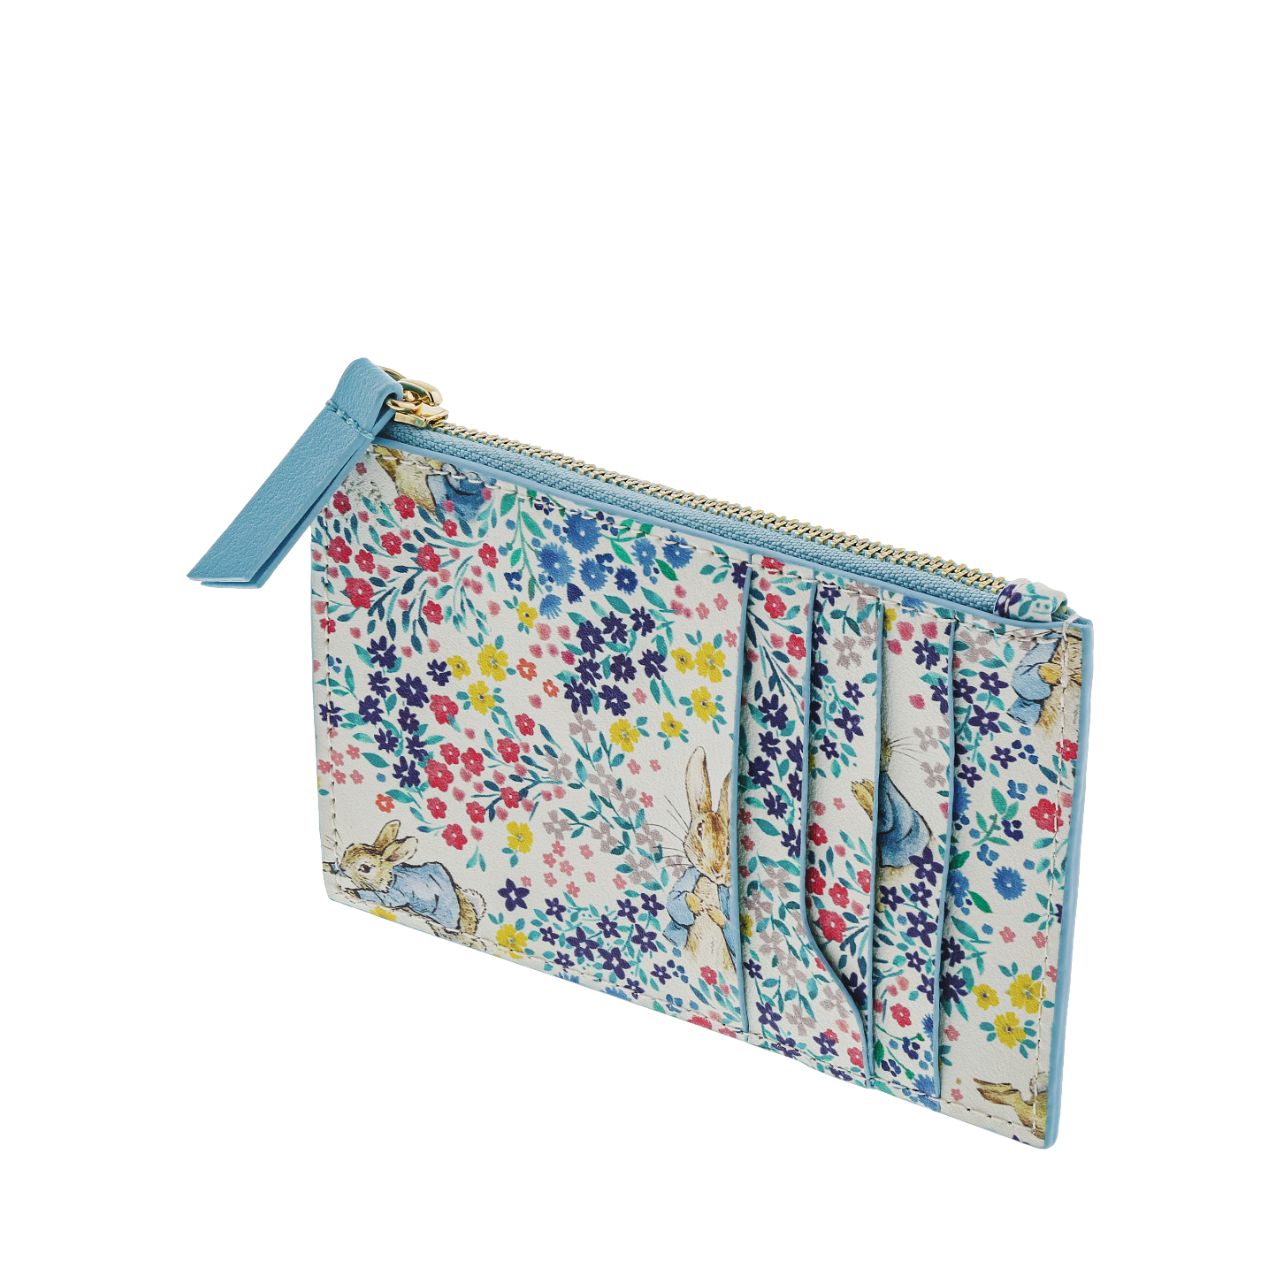 Beatrix Potter Peter Rabbit Garden Party Pop Up Purse  This beautiful Peter Rabbit Garden Party Pop Up Purse features a new design with 4 card holders and a zip top to keep all your loose change.